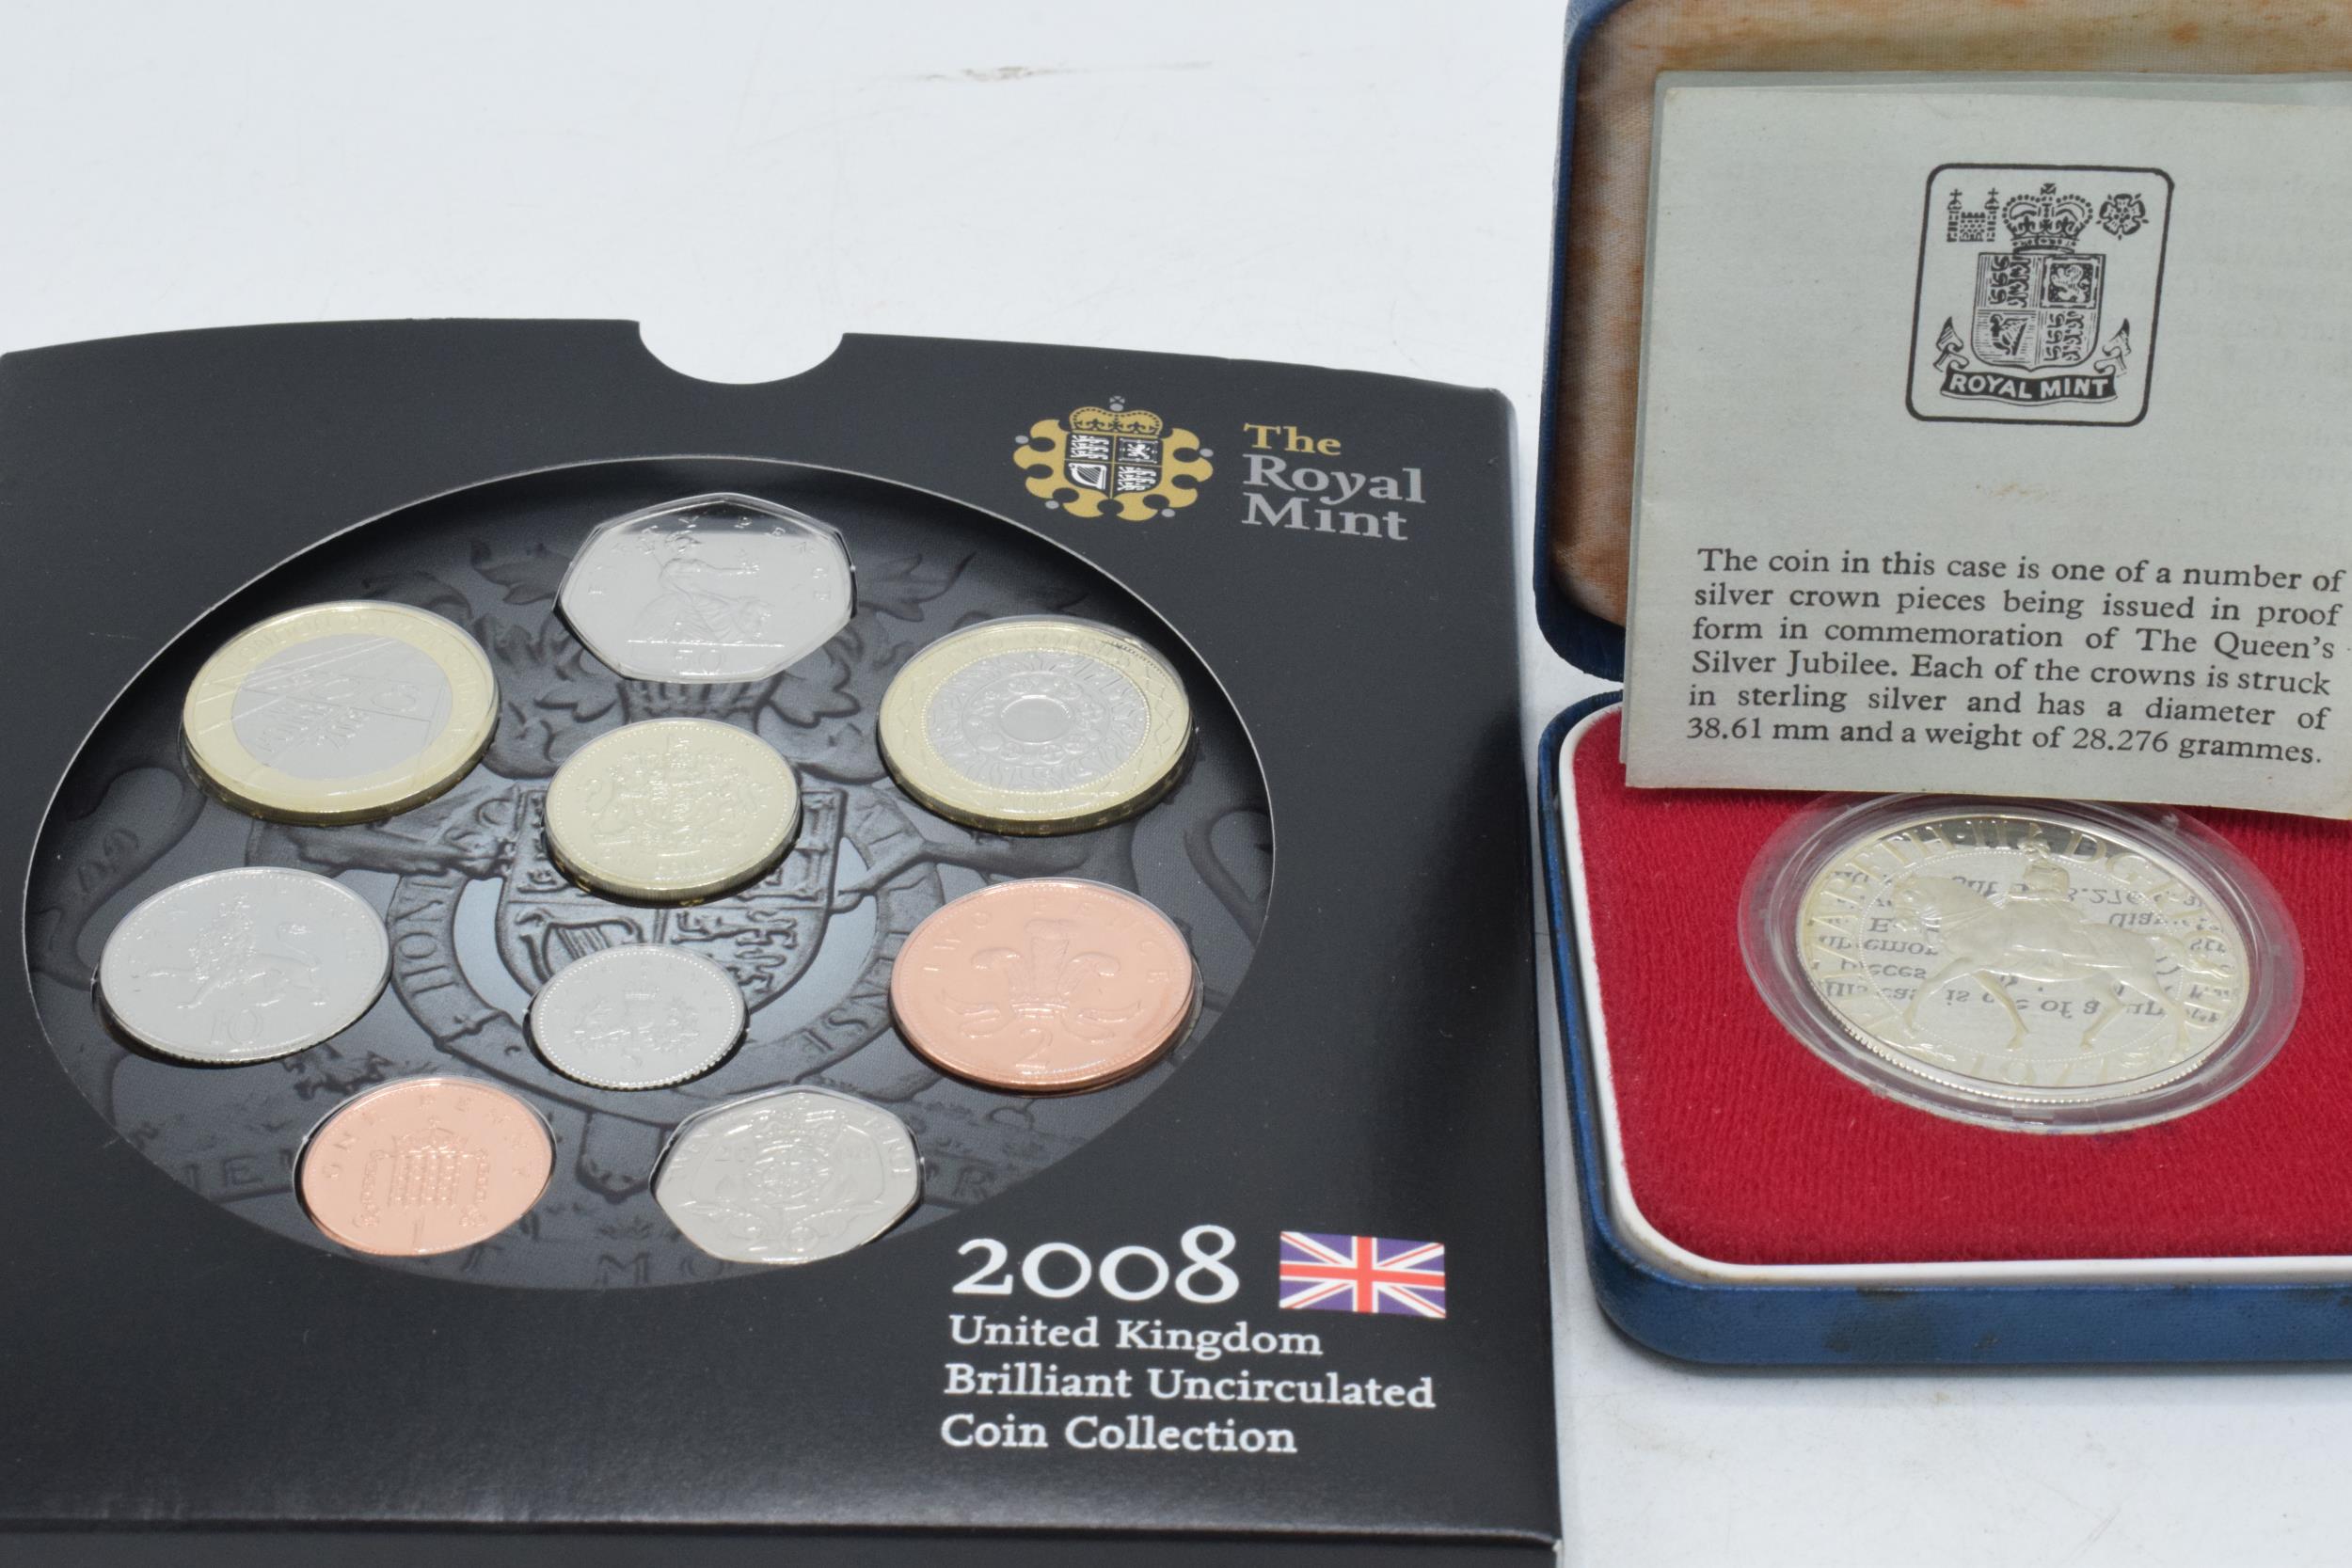 Boxed Royal Mint Elizabeth II Silver Proof crown together with 2008 UK Brilliant Uncirculated Coin - Image 3 of 3